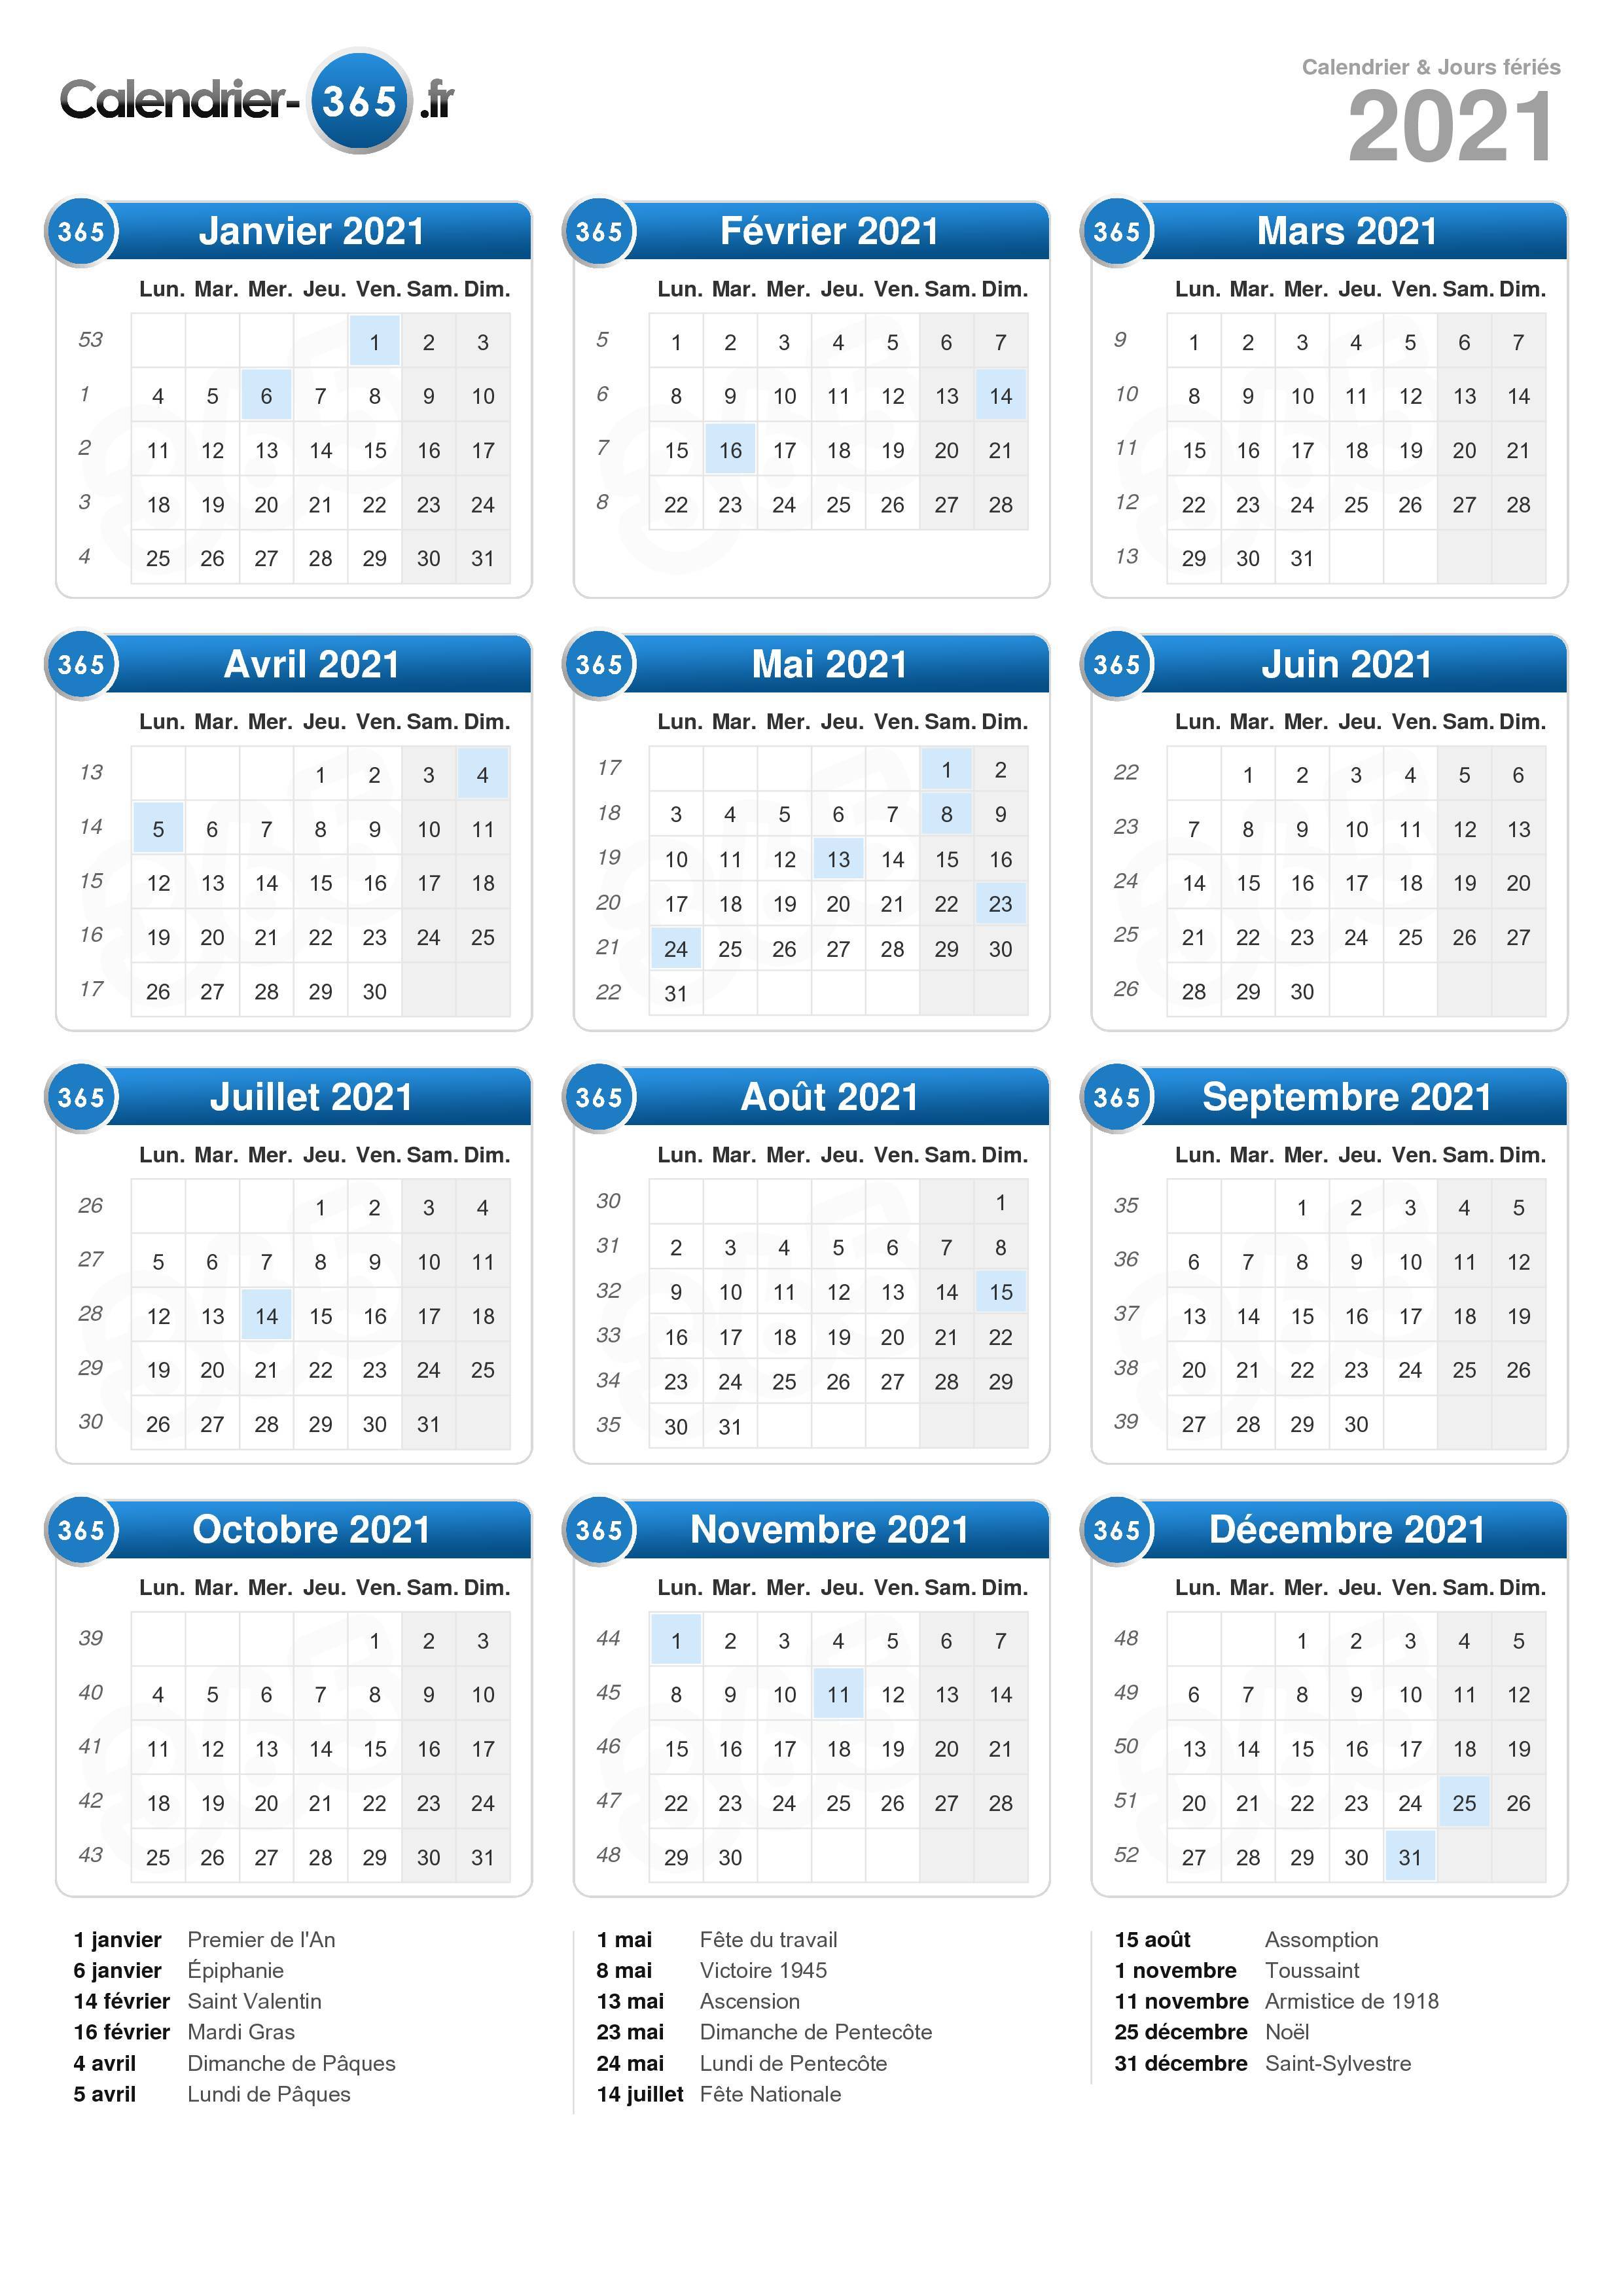 Calendrier 365 Jours 2021 Calendrier 2021